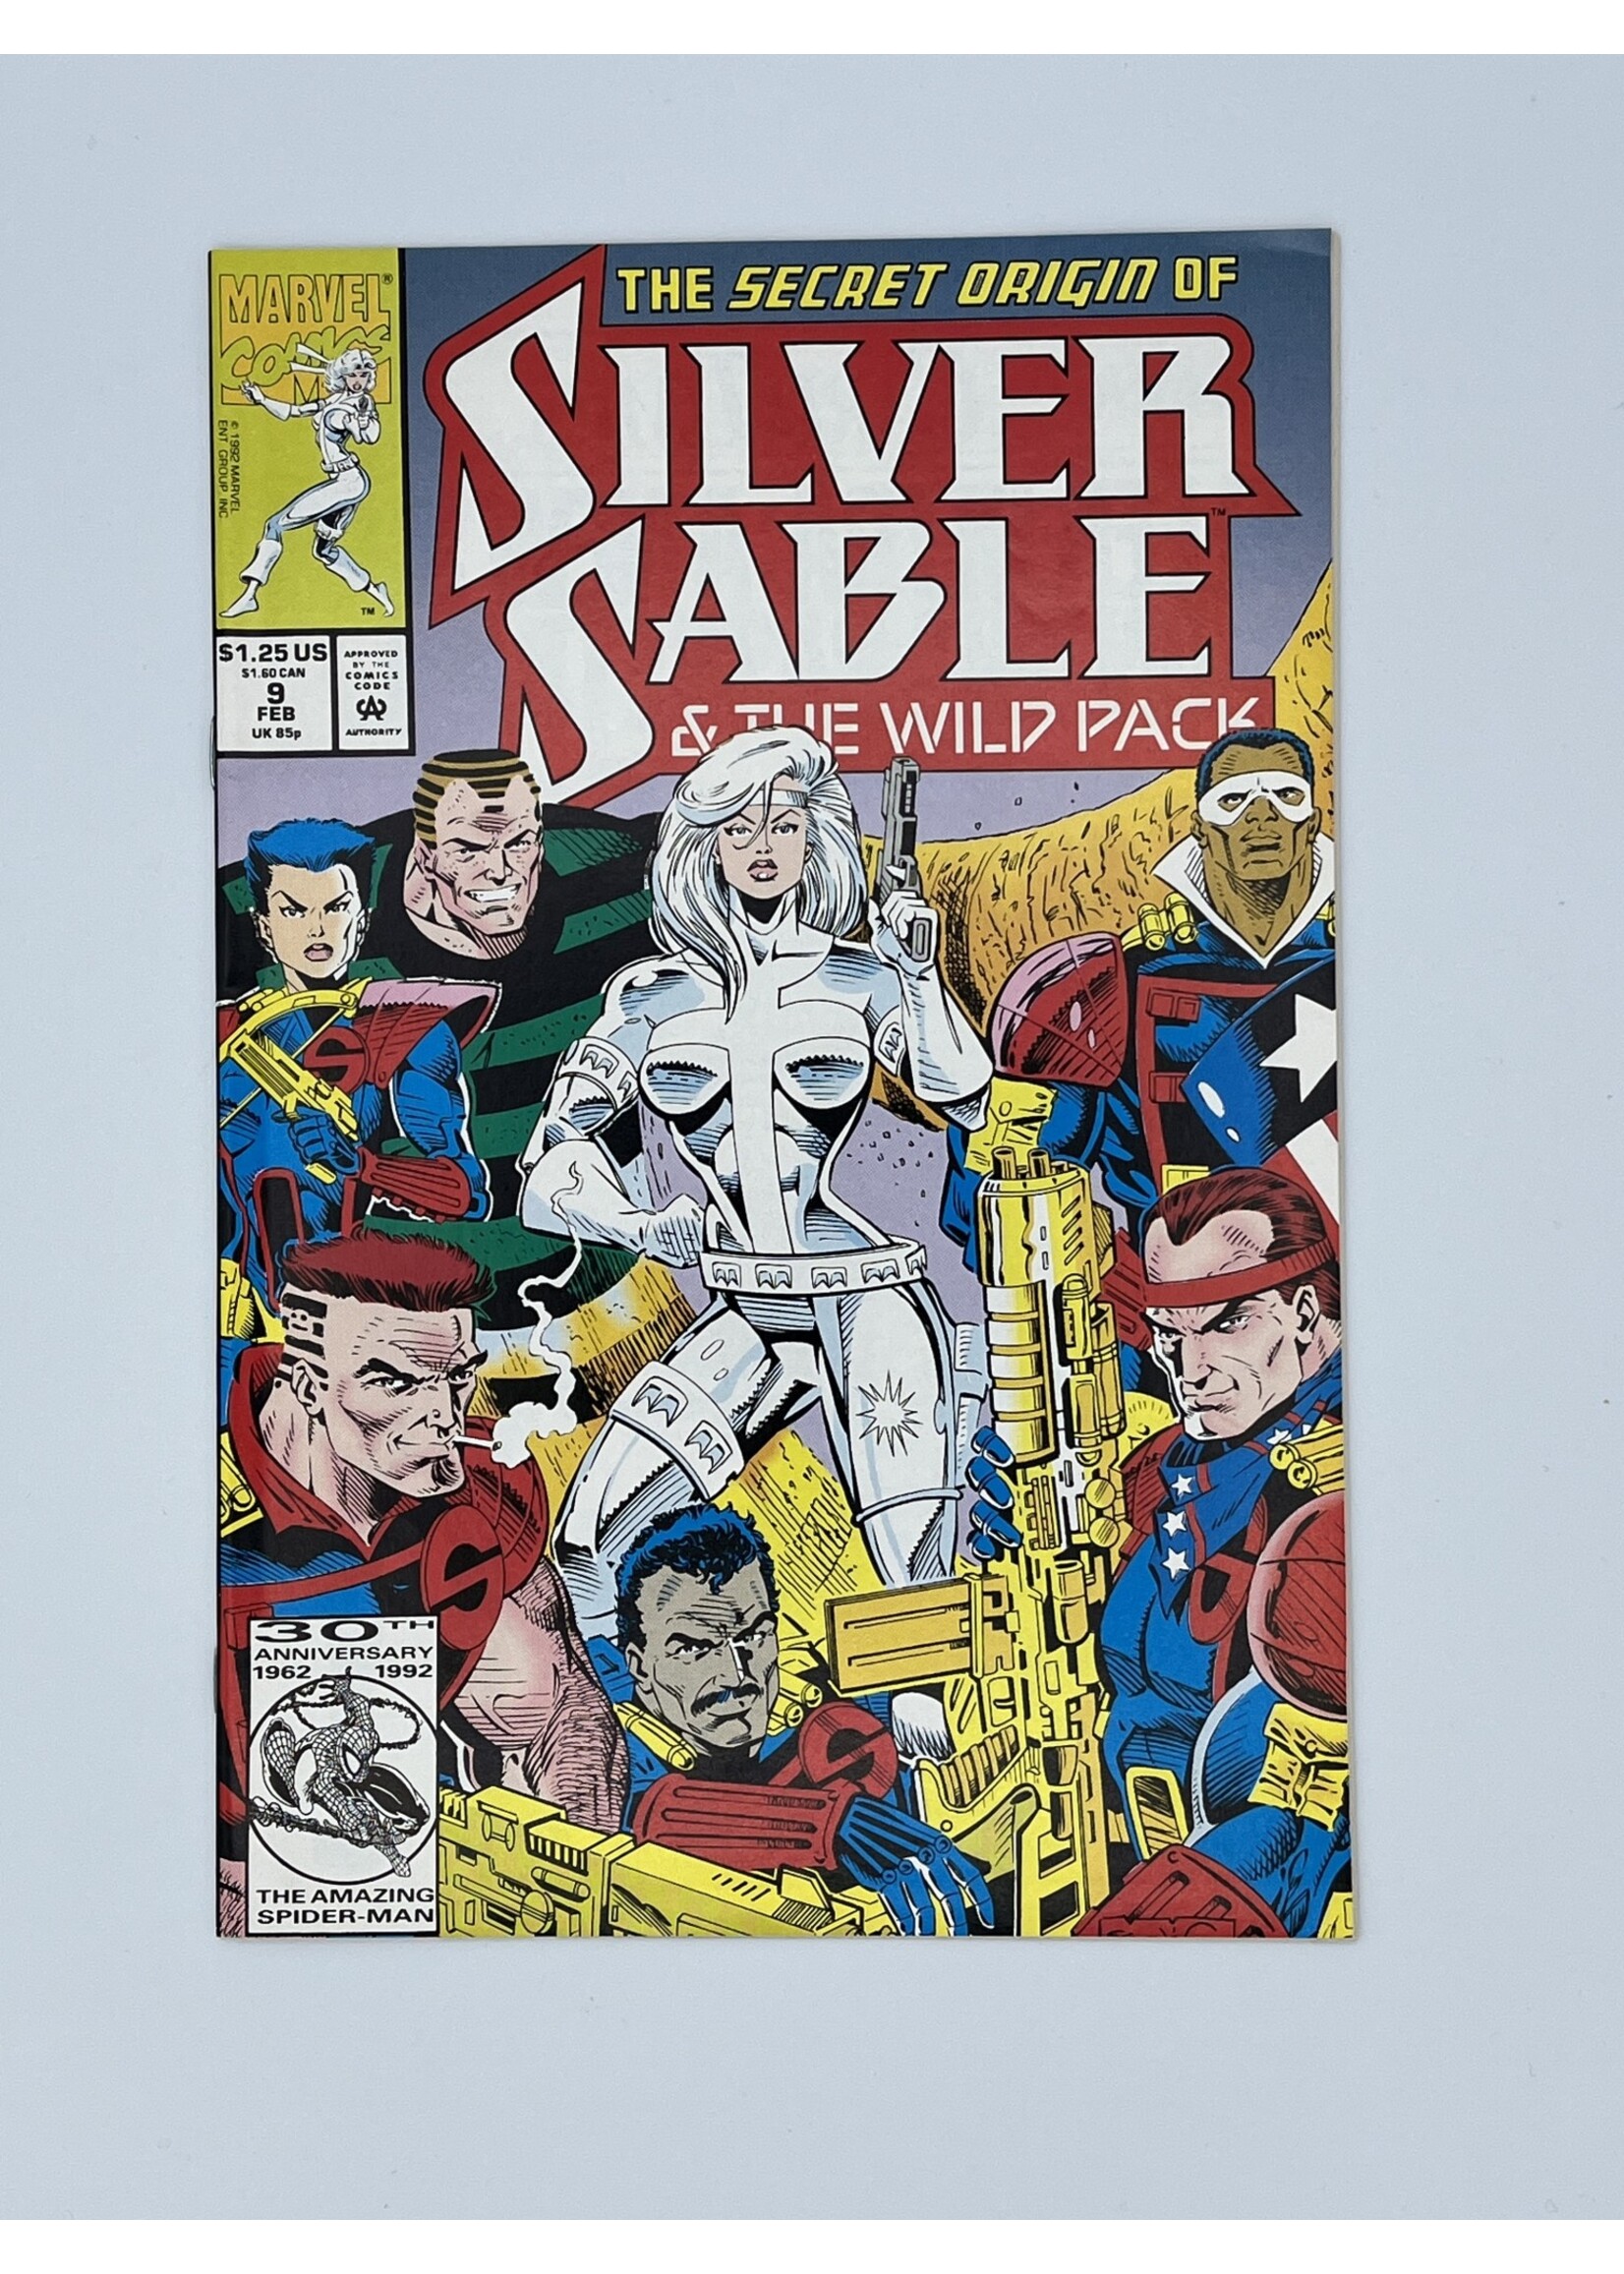 Marvel SILVER SABLE And THE WILD PACK #9 Marvel February 1993